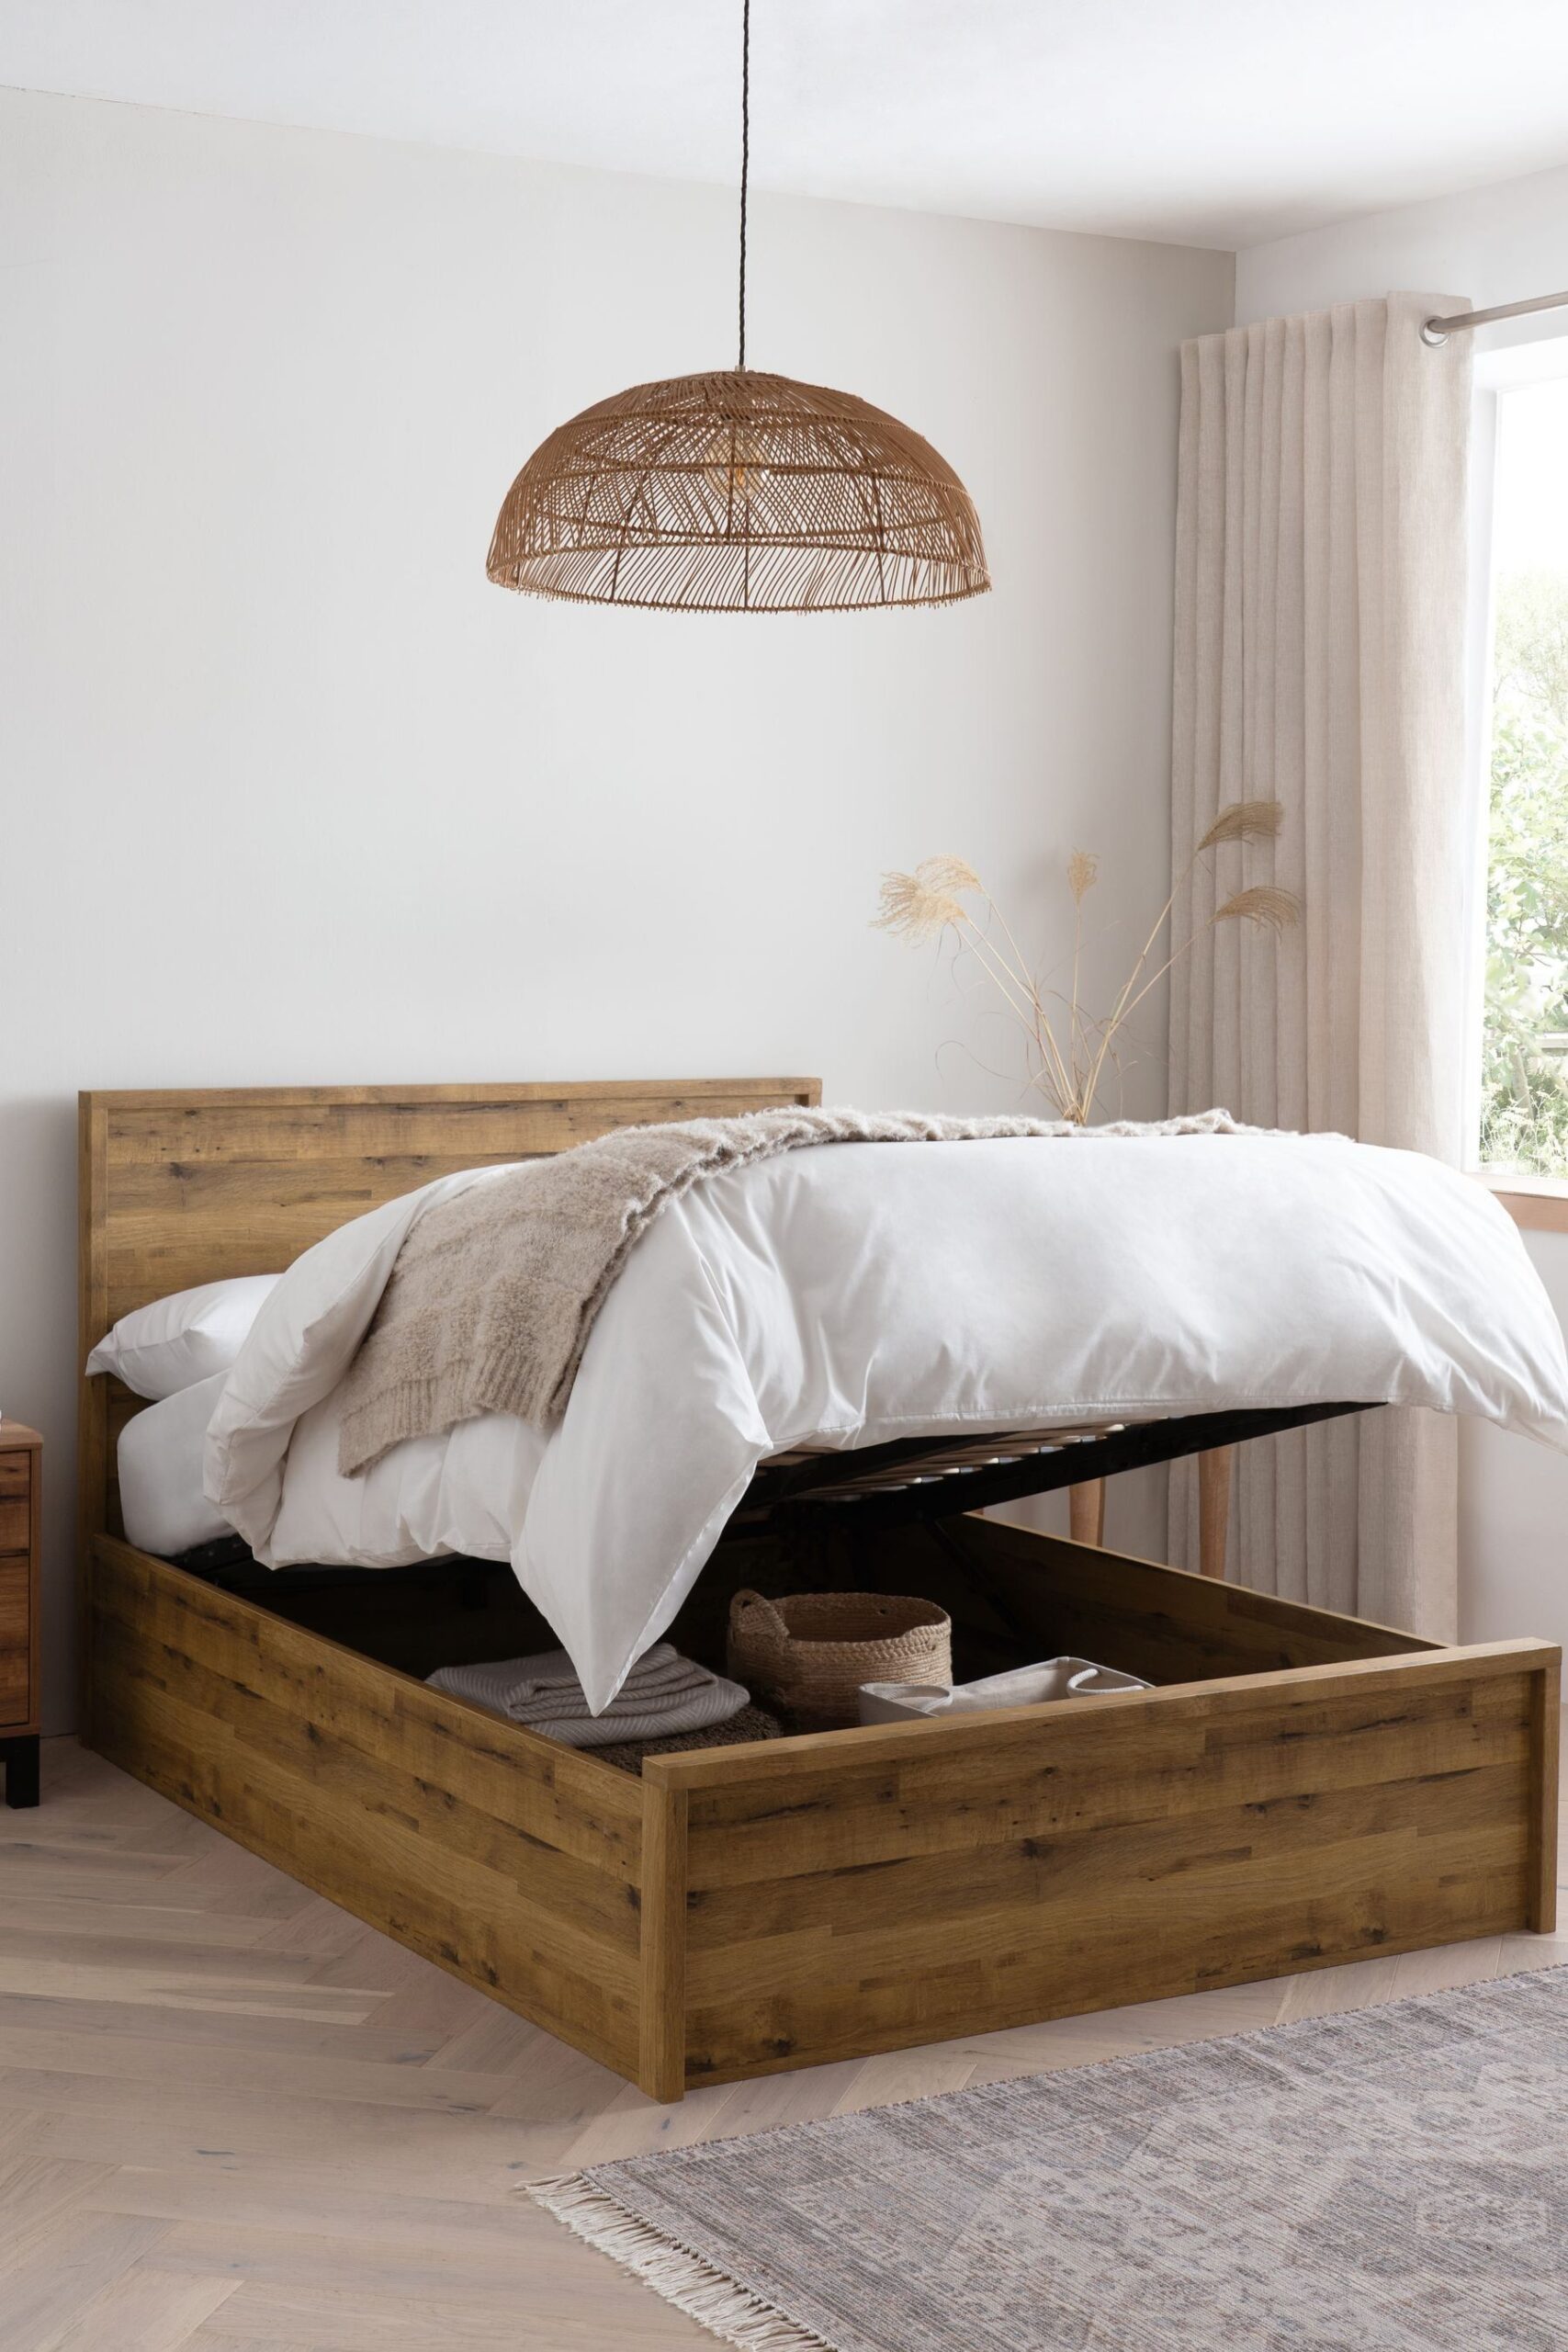 Wooden King Size Bed With Storage : Elegant Wooden King Size Bed With Storage for a Cozy Bedroom Retreat